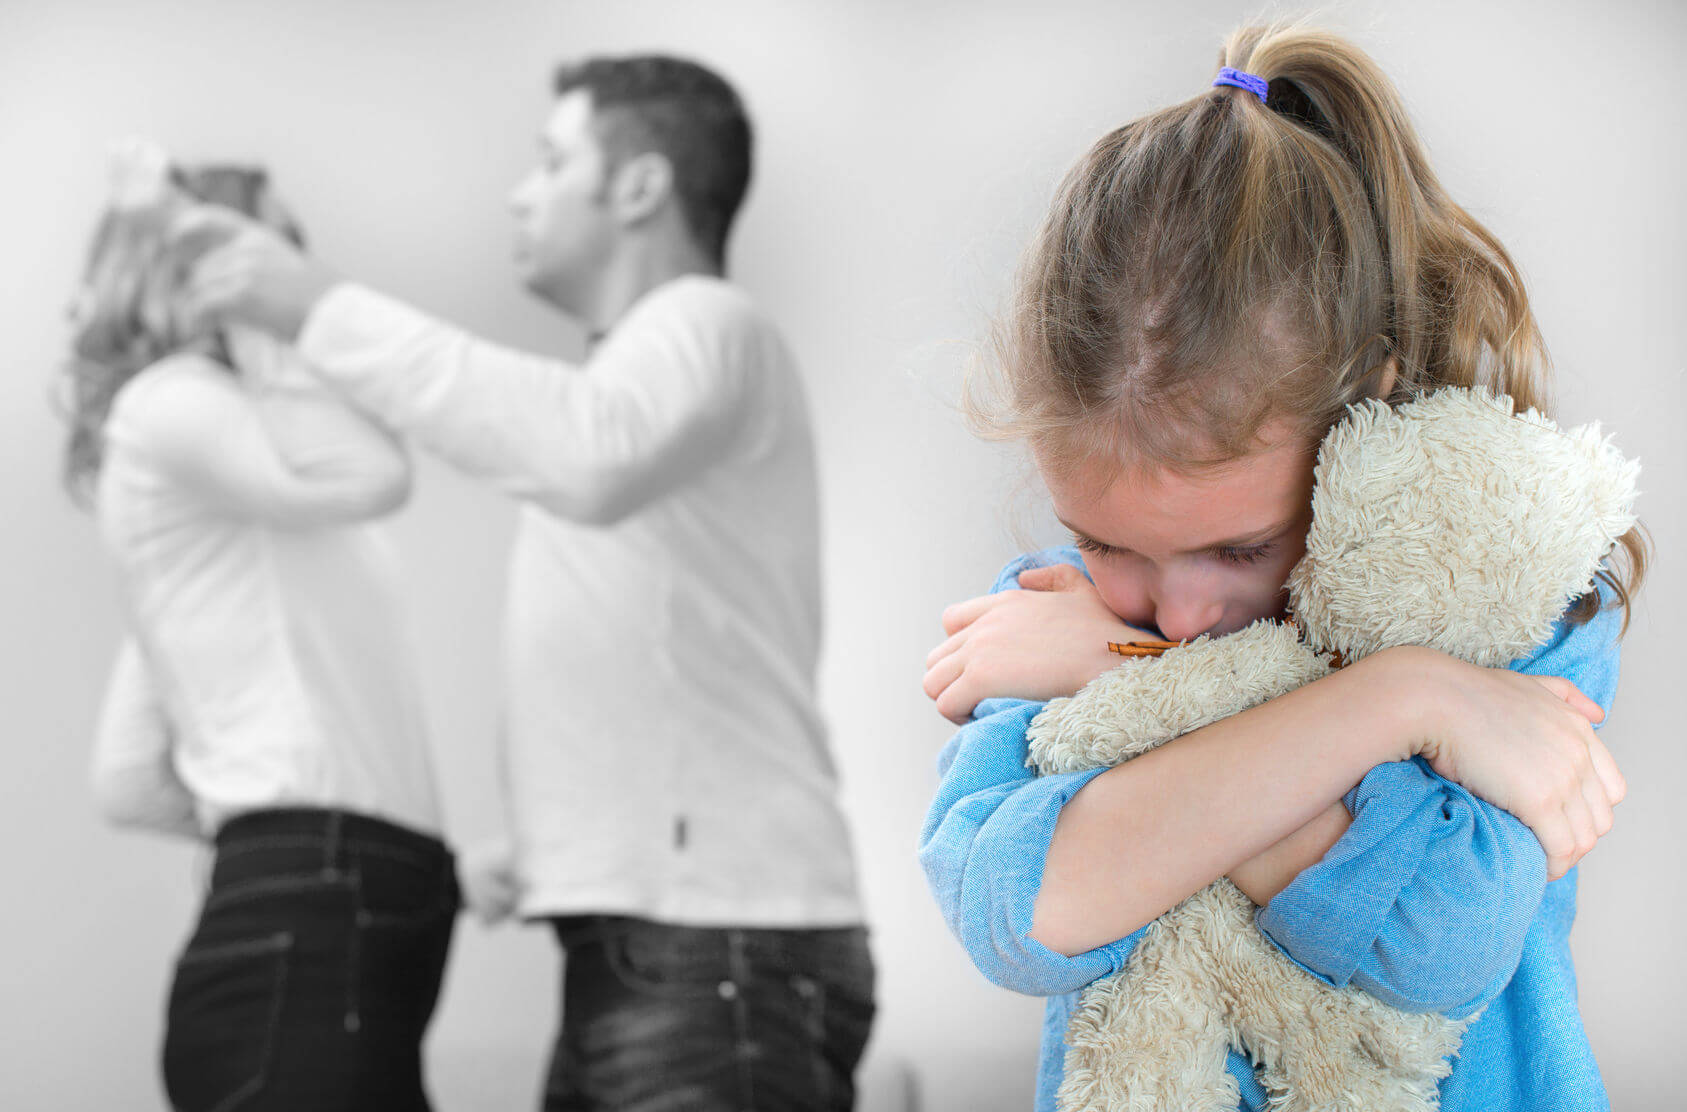 Protective orders to protect against family violence are sometimes necessary. Divorce Emergency - Sean Whitworth can help